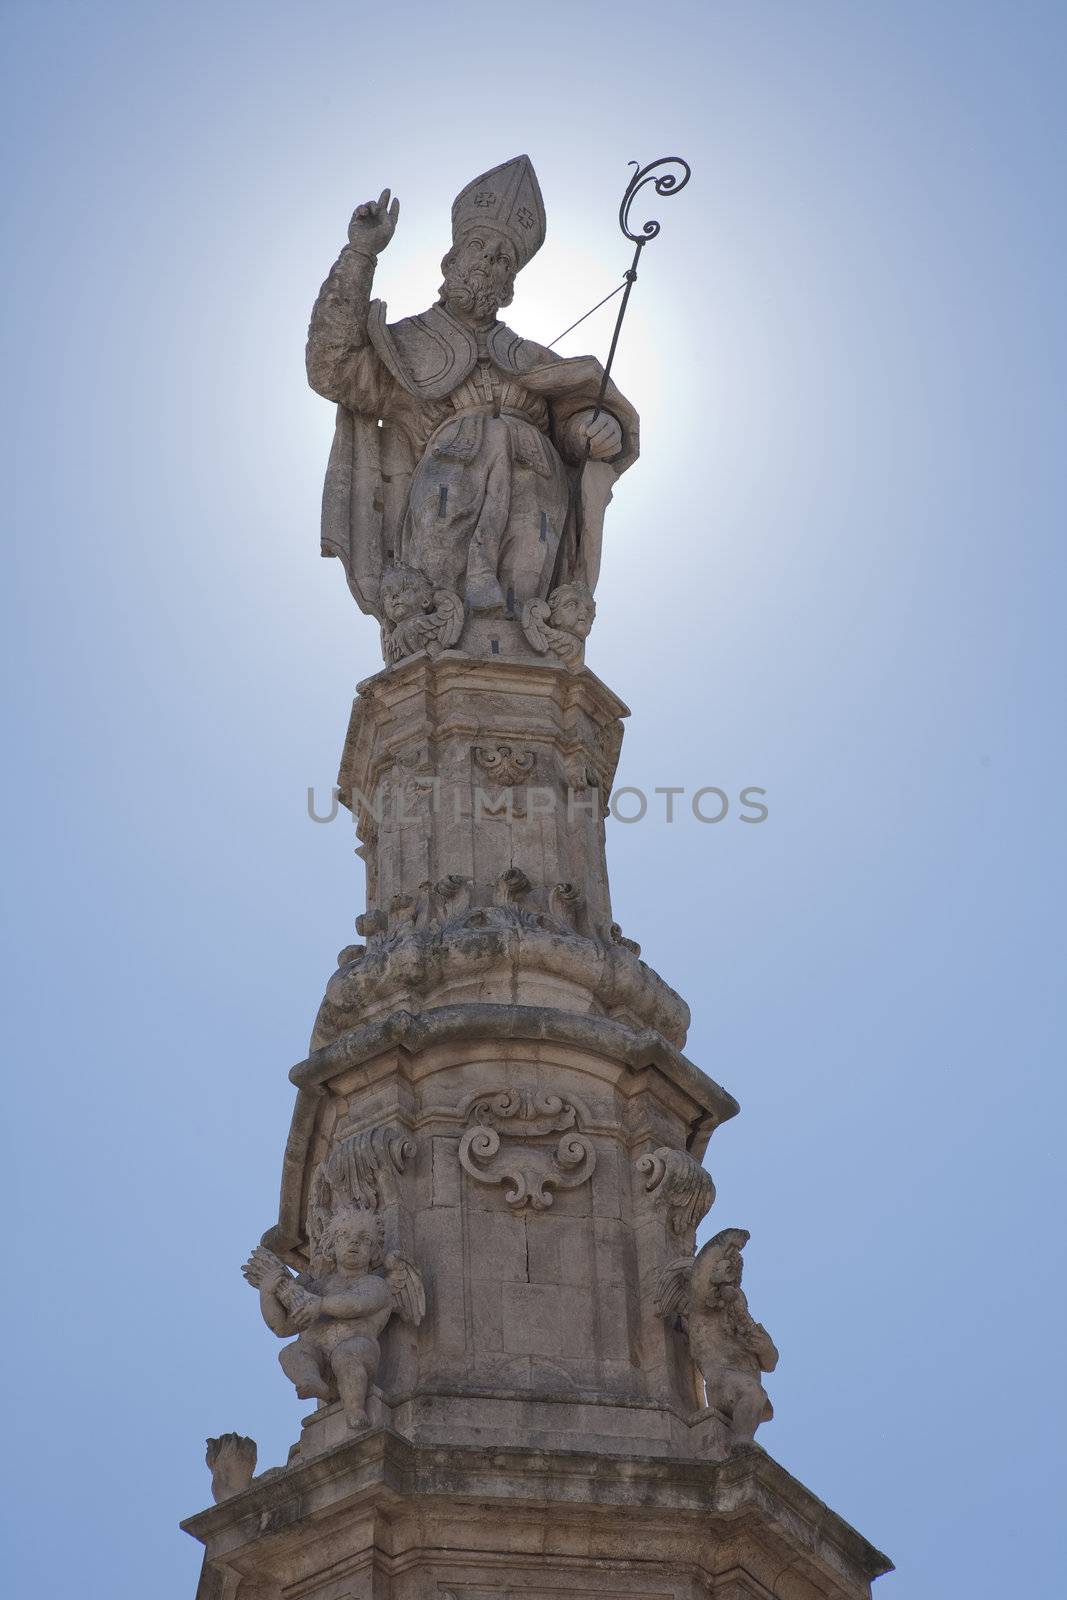 Statue of Saint Oronzo by ABCDK